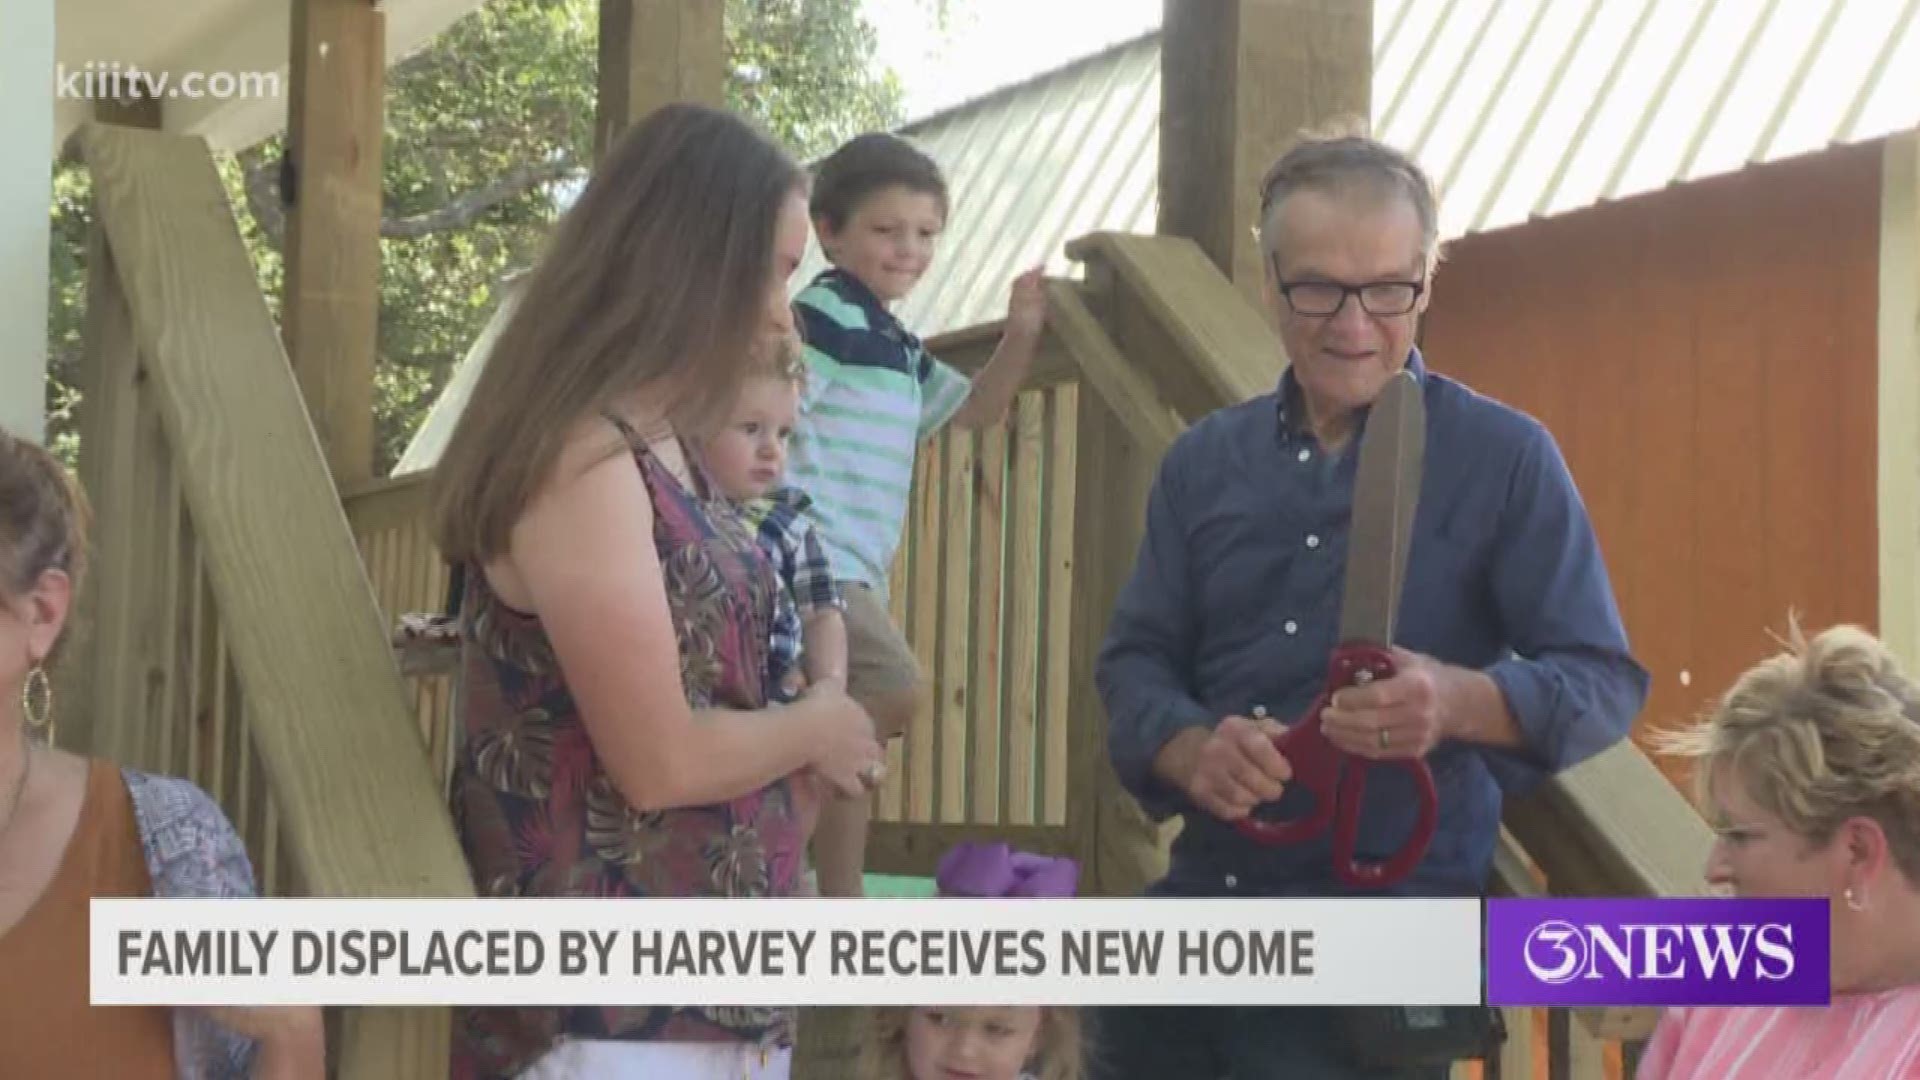 A Rockport family of eight had been separated since Hurricane Harvey, but thanks to Habitat for Humanity, they are finally back together under one roof.